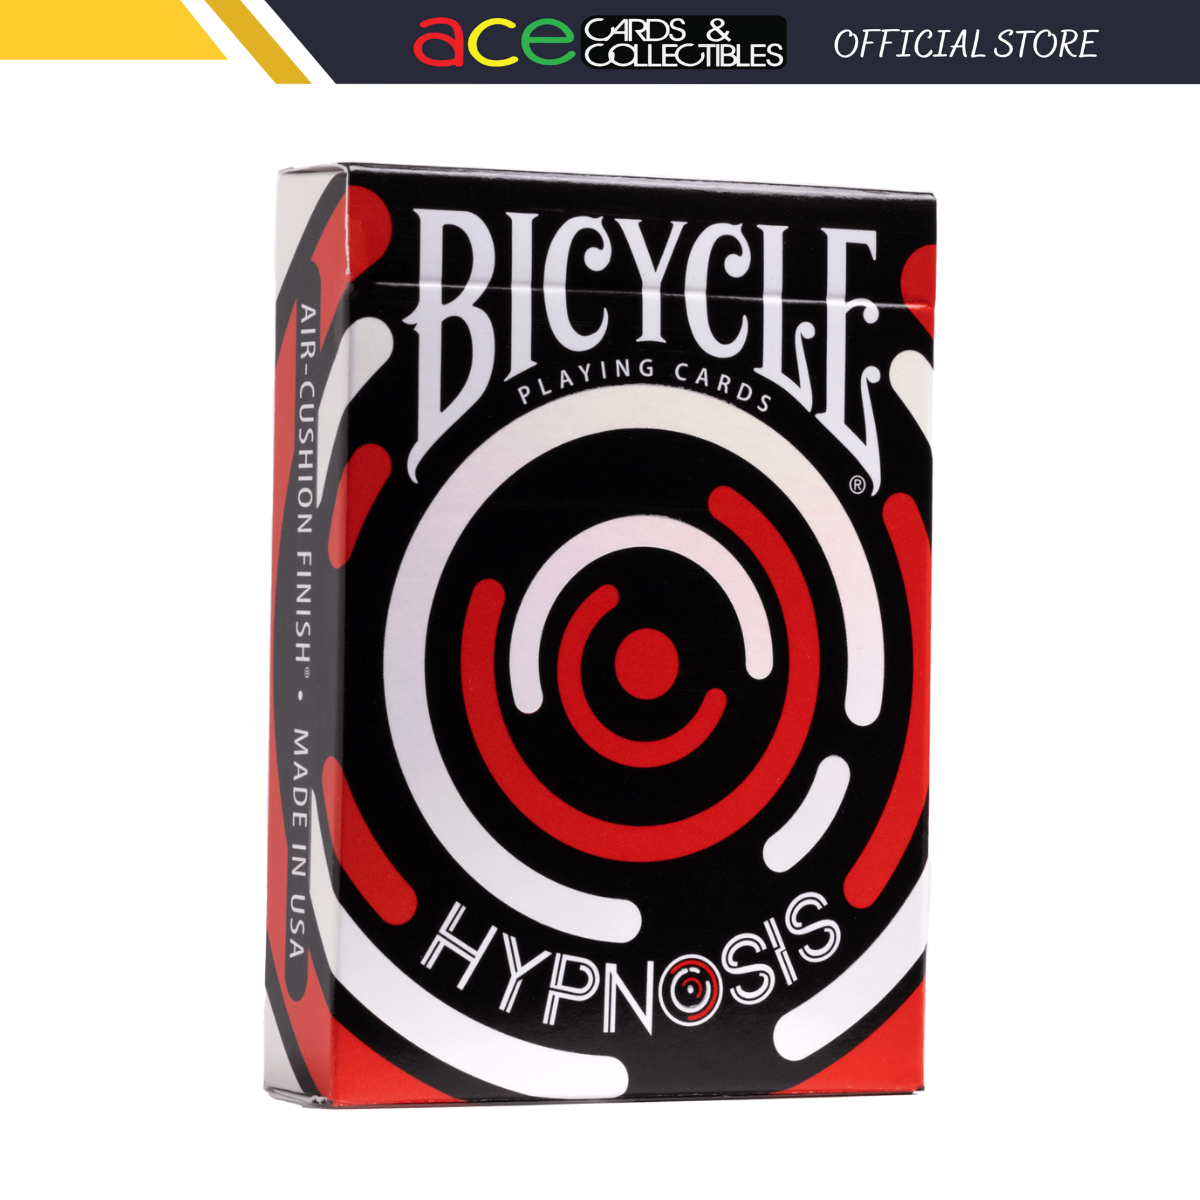 Bicycle Hypnosis V3 Playing Cards-United States Playing Cards Company-Ace Cards &amp; Collectibles